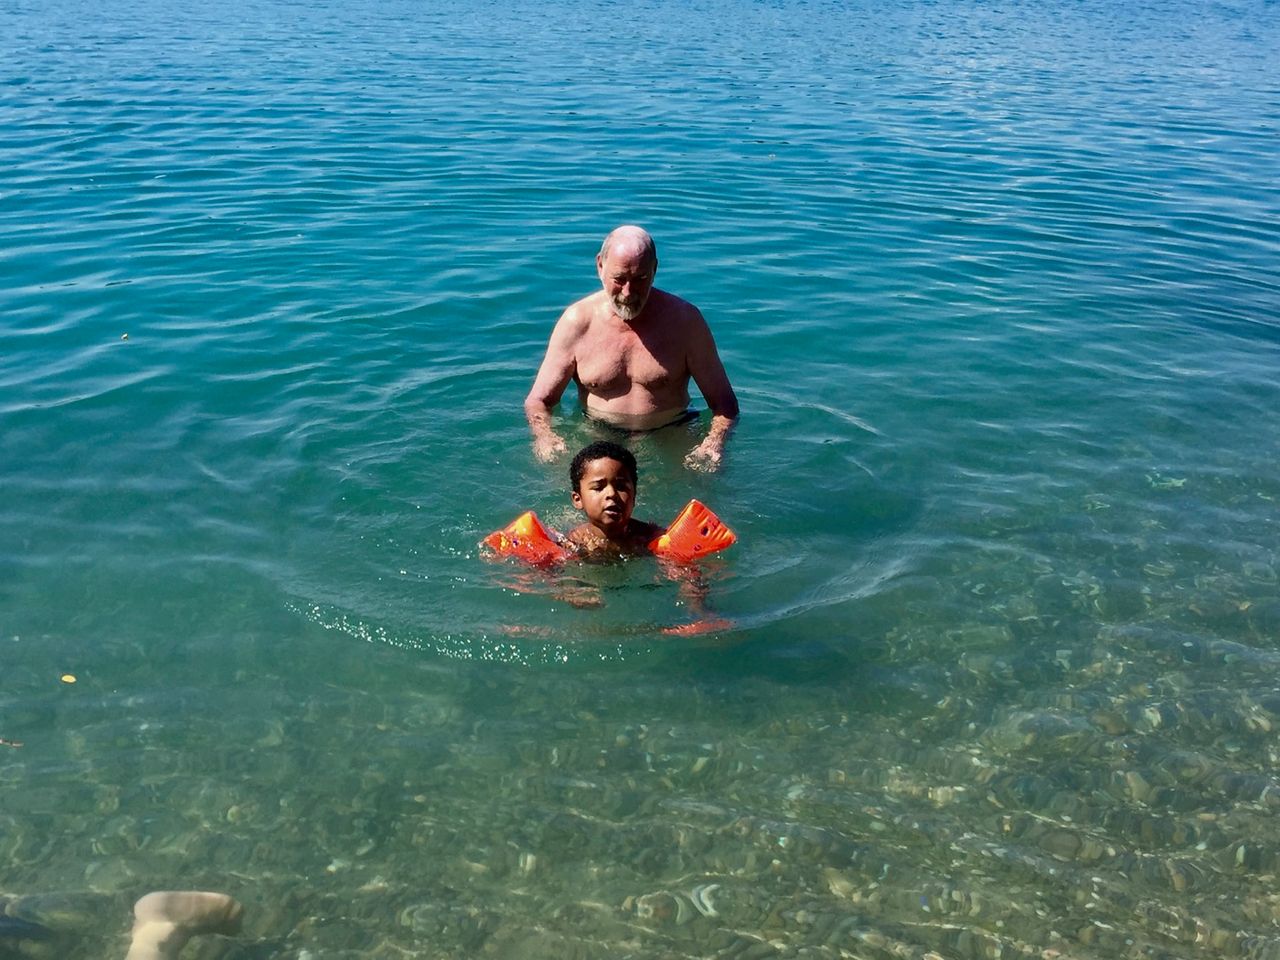 Man and boy swimming in water.